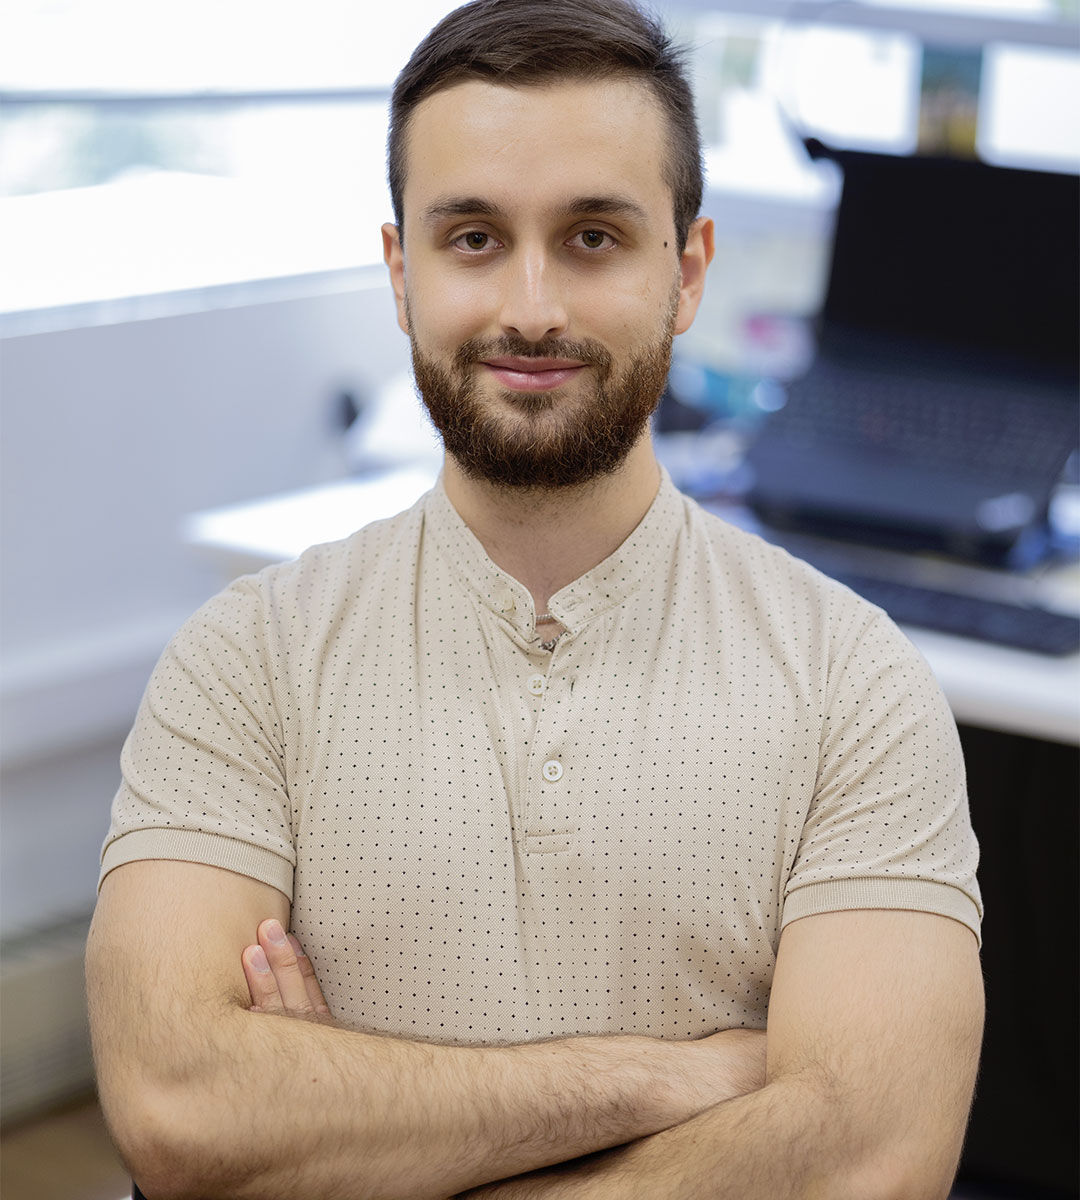 A well-groomed man with a beard, arms crossed, exuding confidence in a modern office environment.